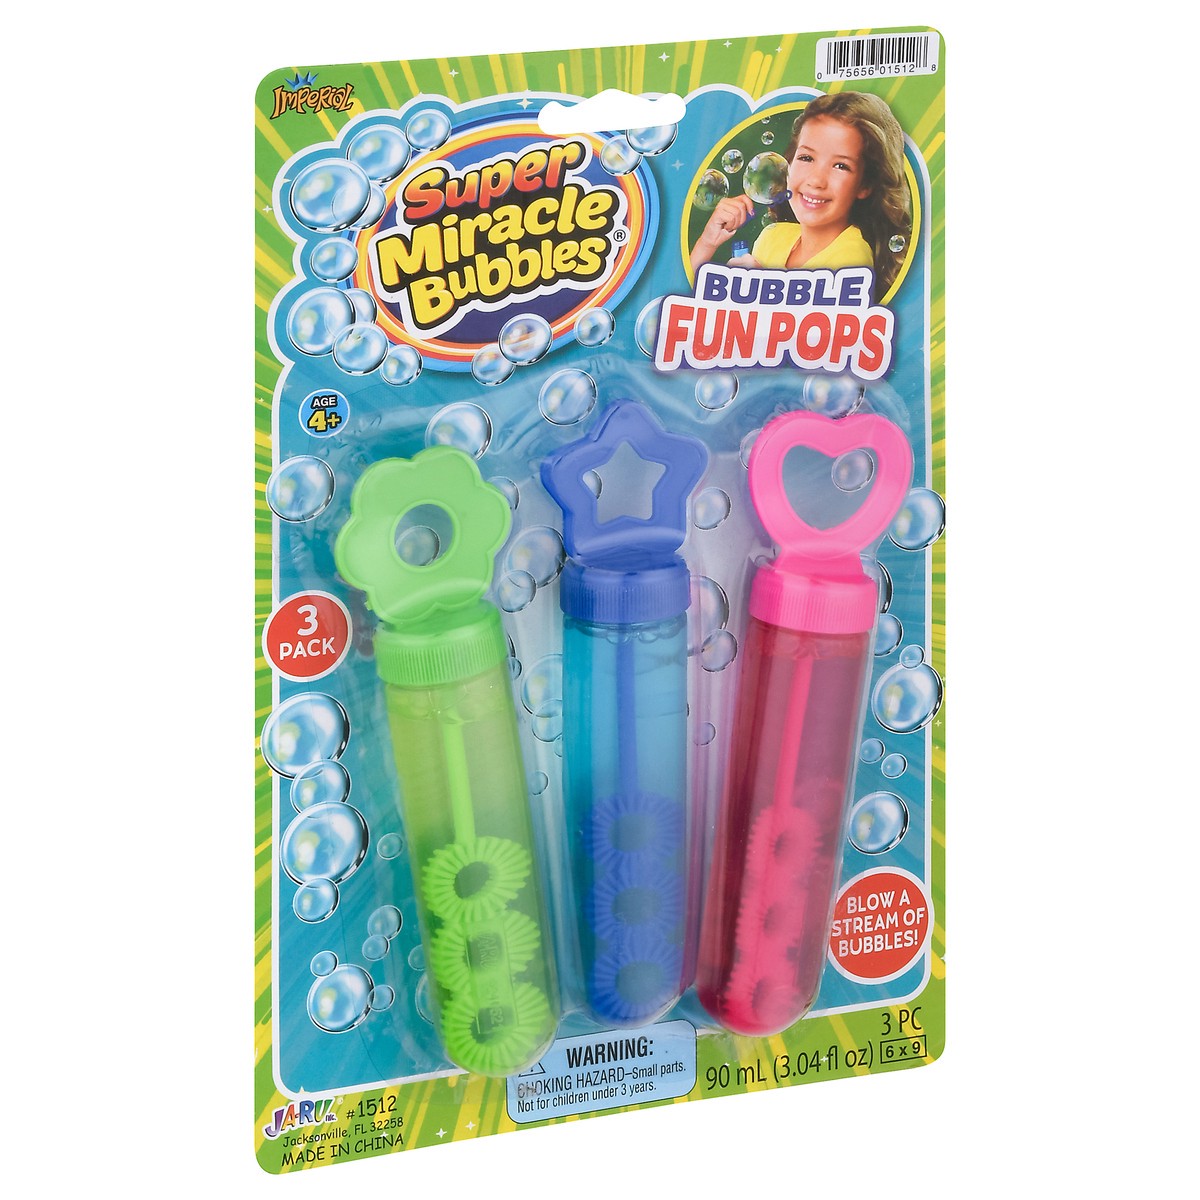 slide 2 of 8, Imperial Super Miracle Bubbles 3 Pack Bubble Fun Pops Age 4+ 3 Toys, 3 ct